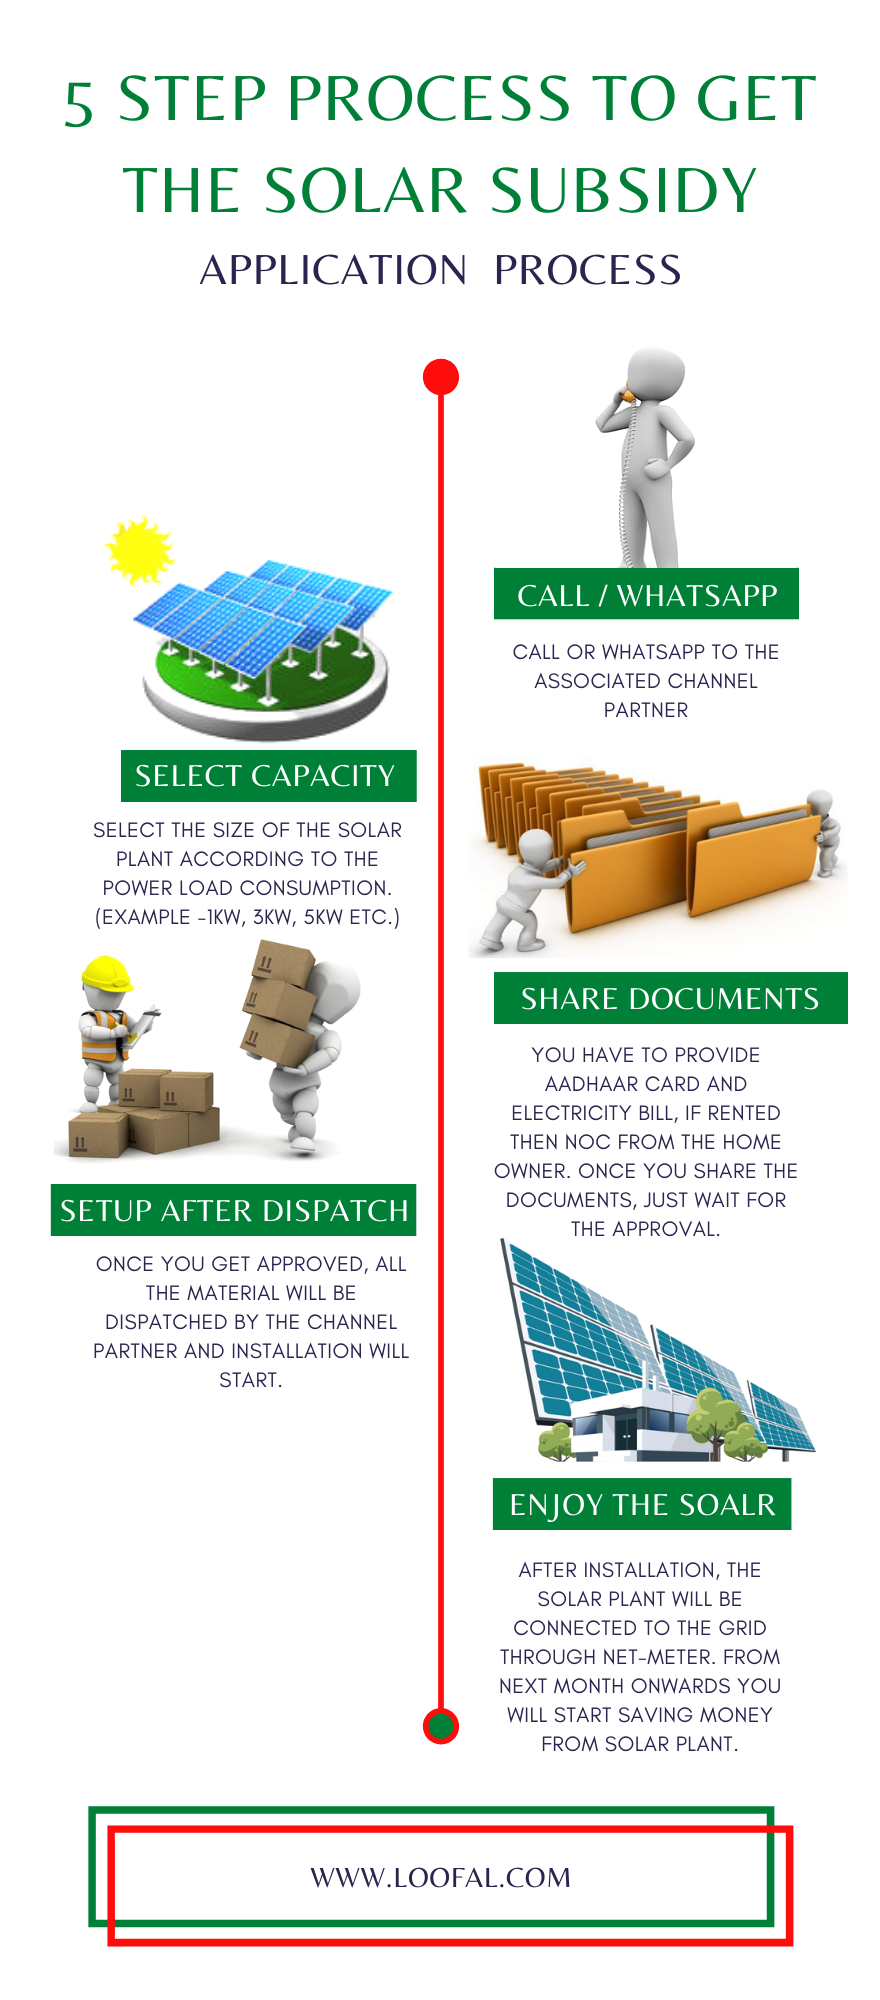 5 Step Process to get the solar subsidy - Infographic - Loofal